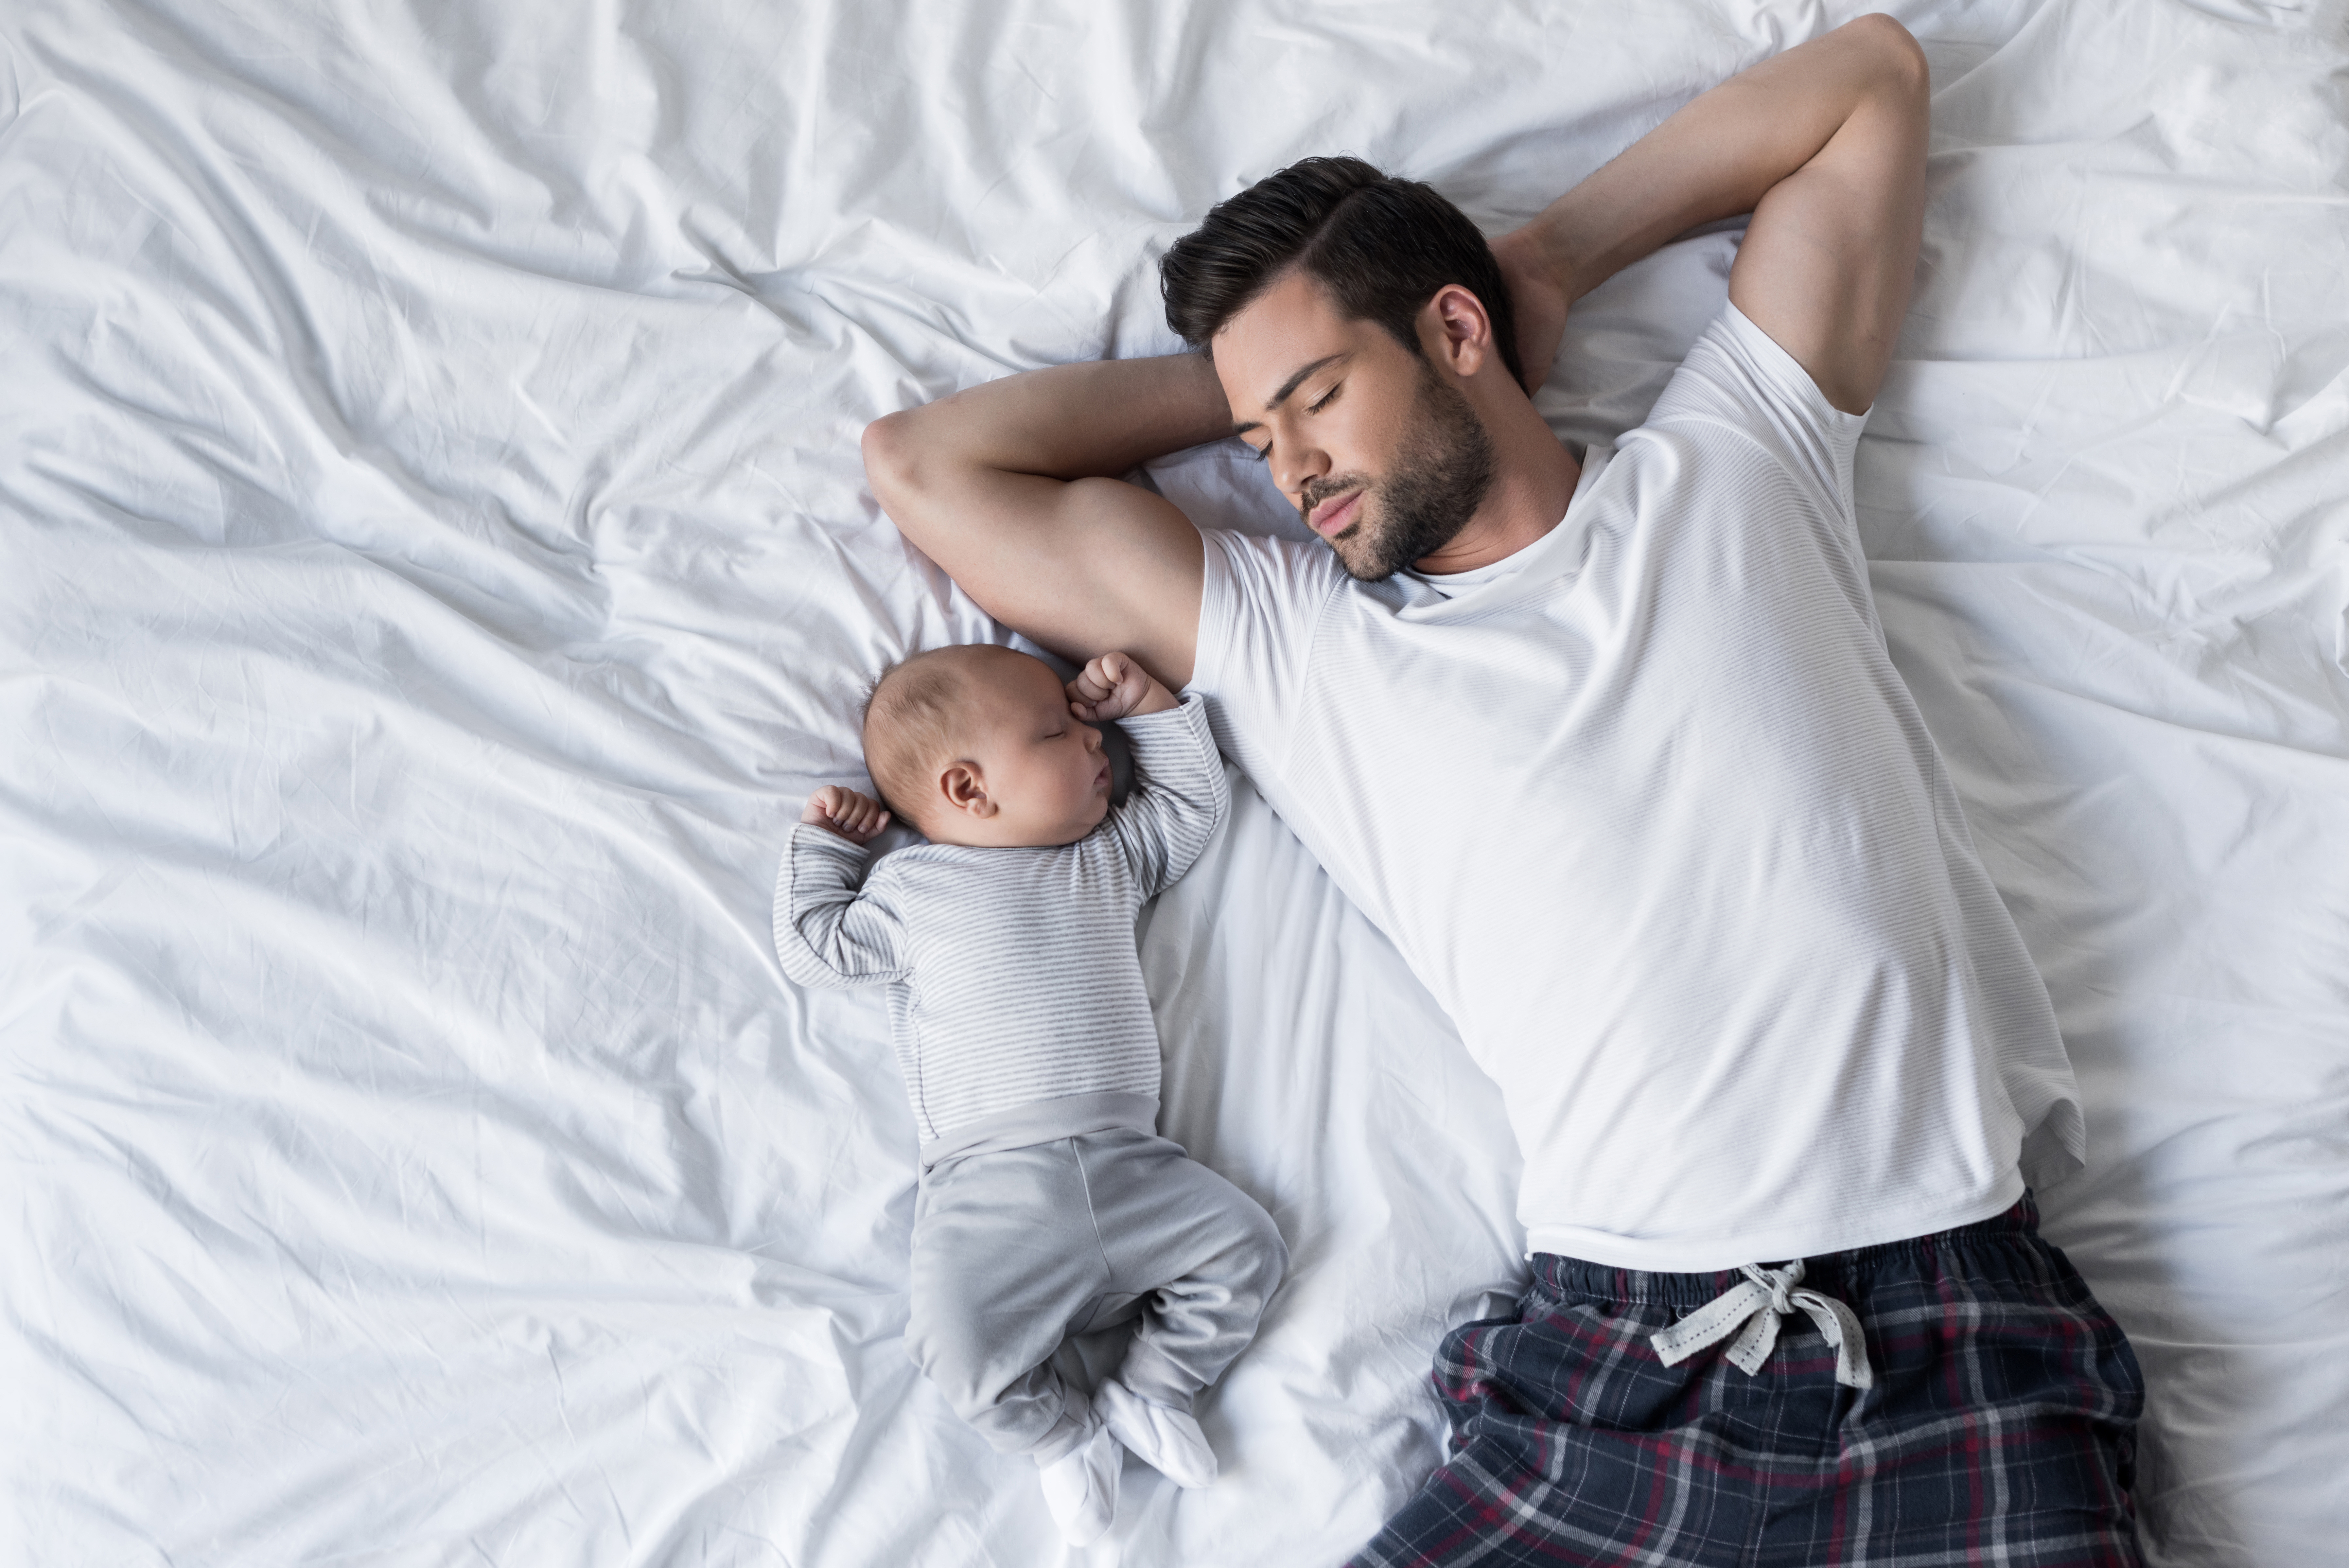 NARAL singles out pro-choice fathers on Fathers Day.LightField Studios, Shutterstock